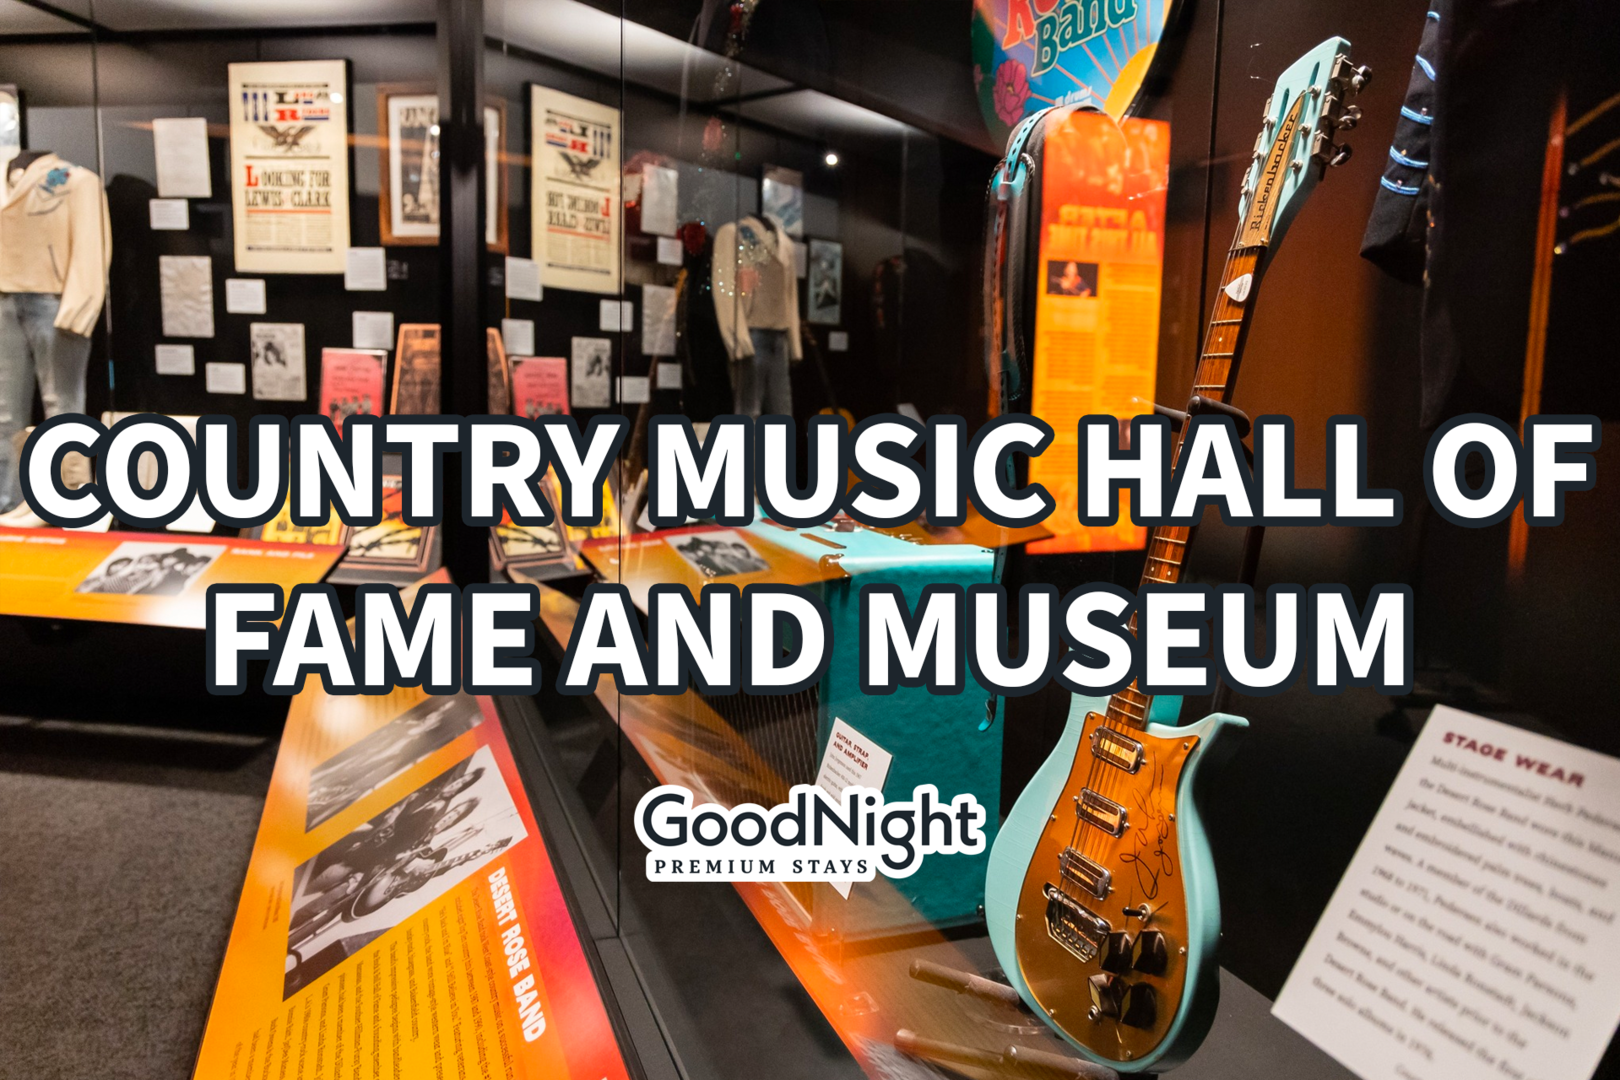 6 mins: Country Music Hall of Fame and Museum